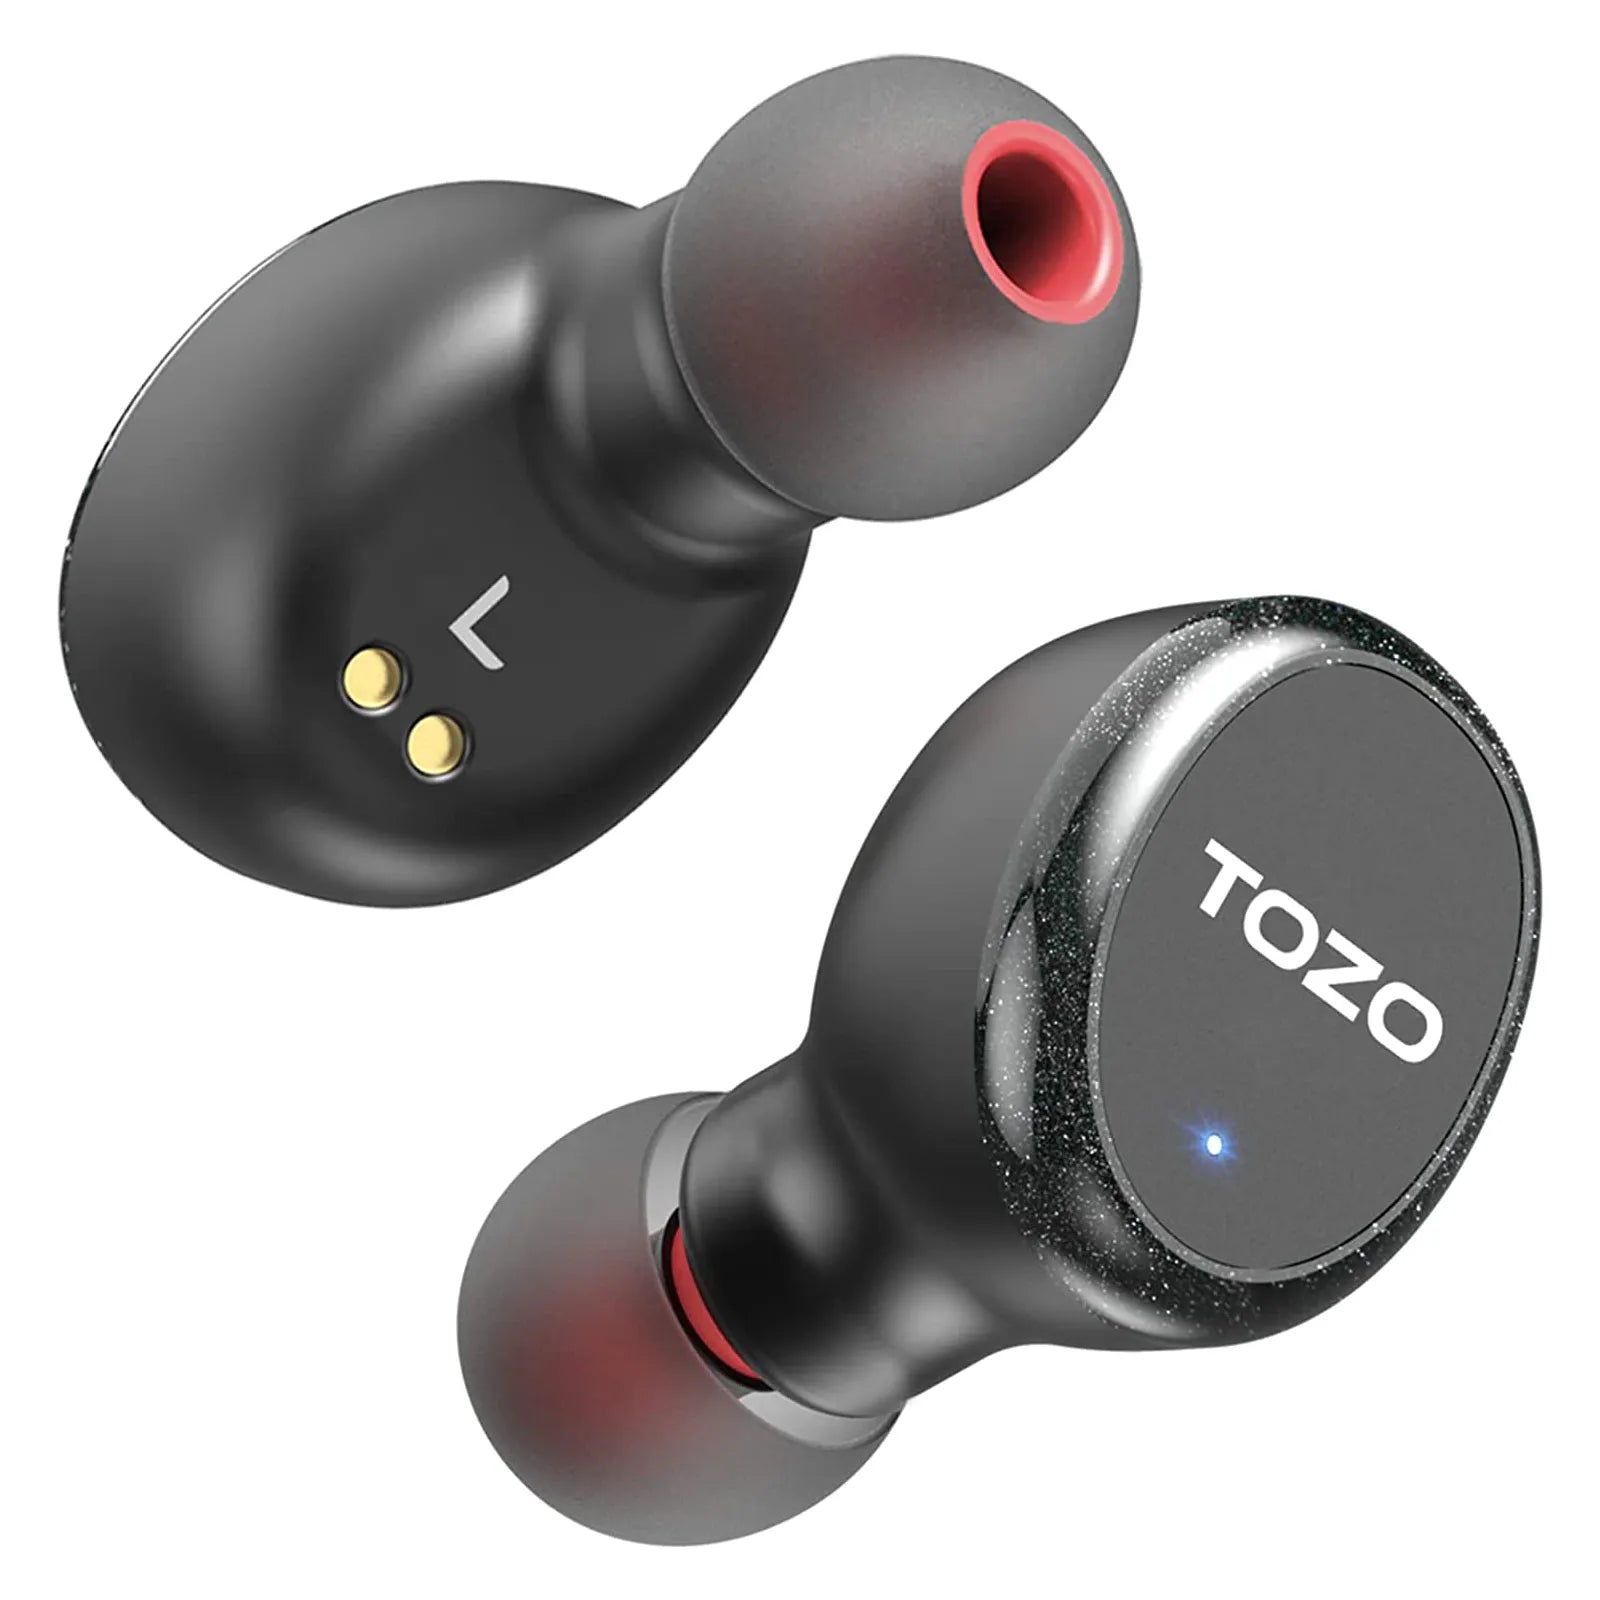 TOZO T10 TWS Bluetooth 5.0 Earbuds Wireless Stereo Headphones IPX8 New  Sealed